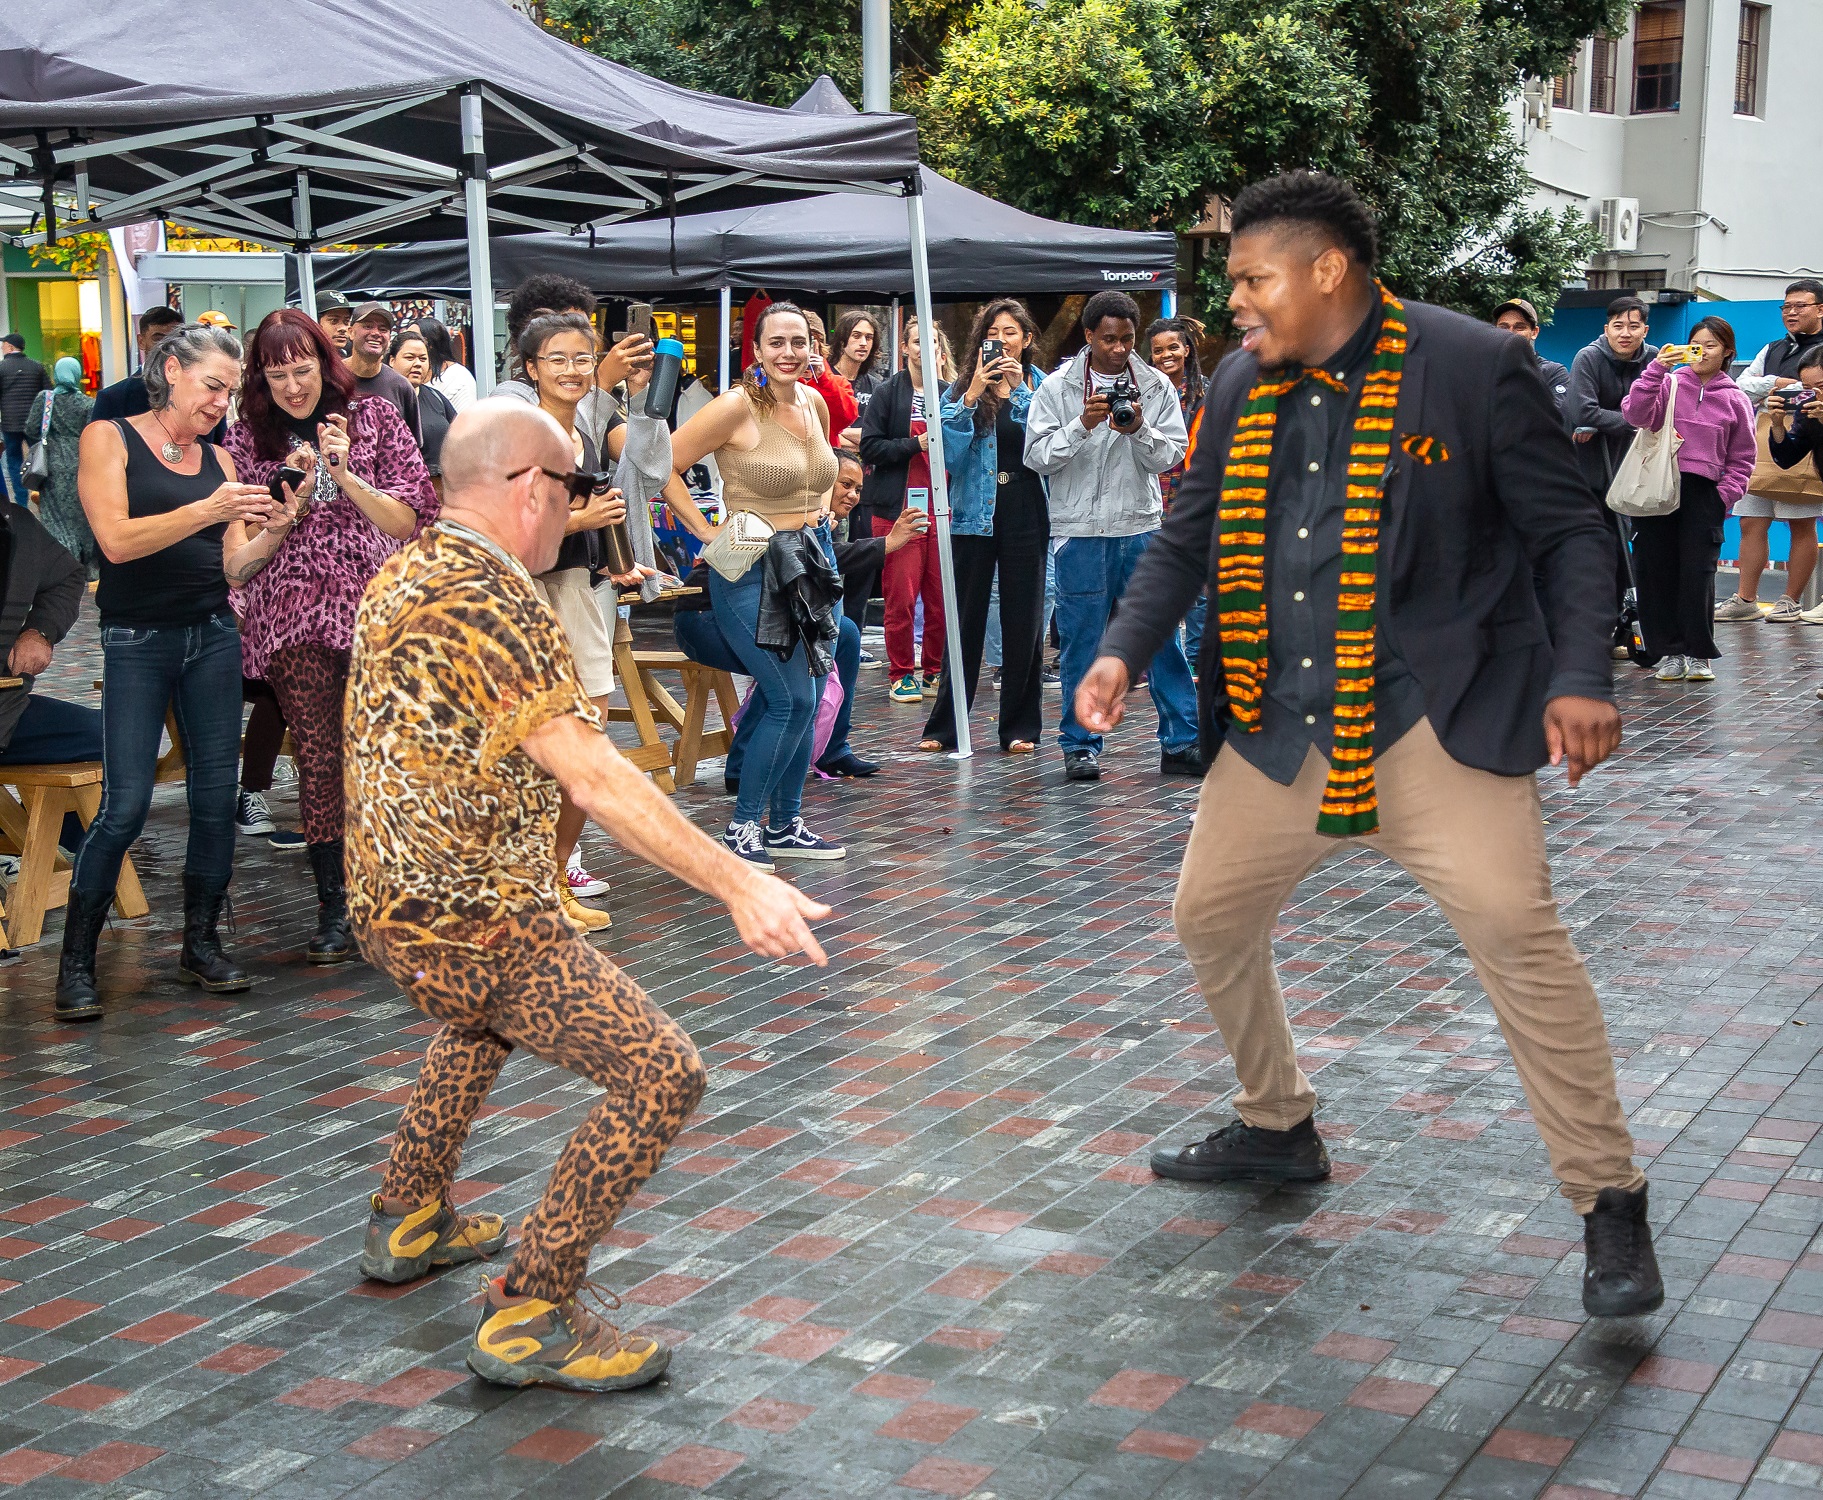 Two men, one European and one African having a dance-off.